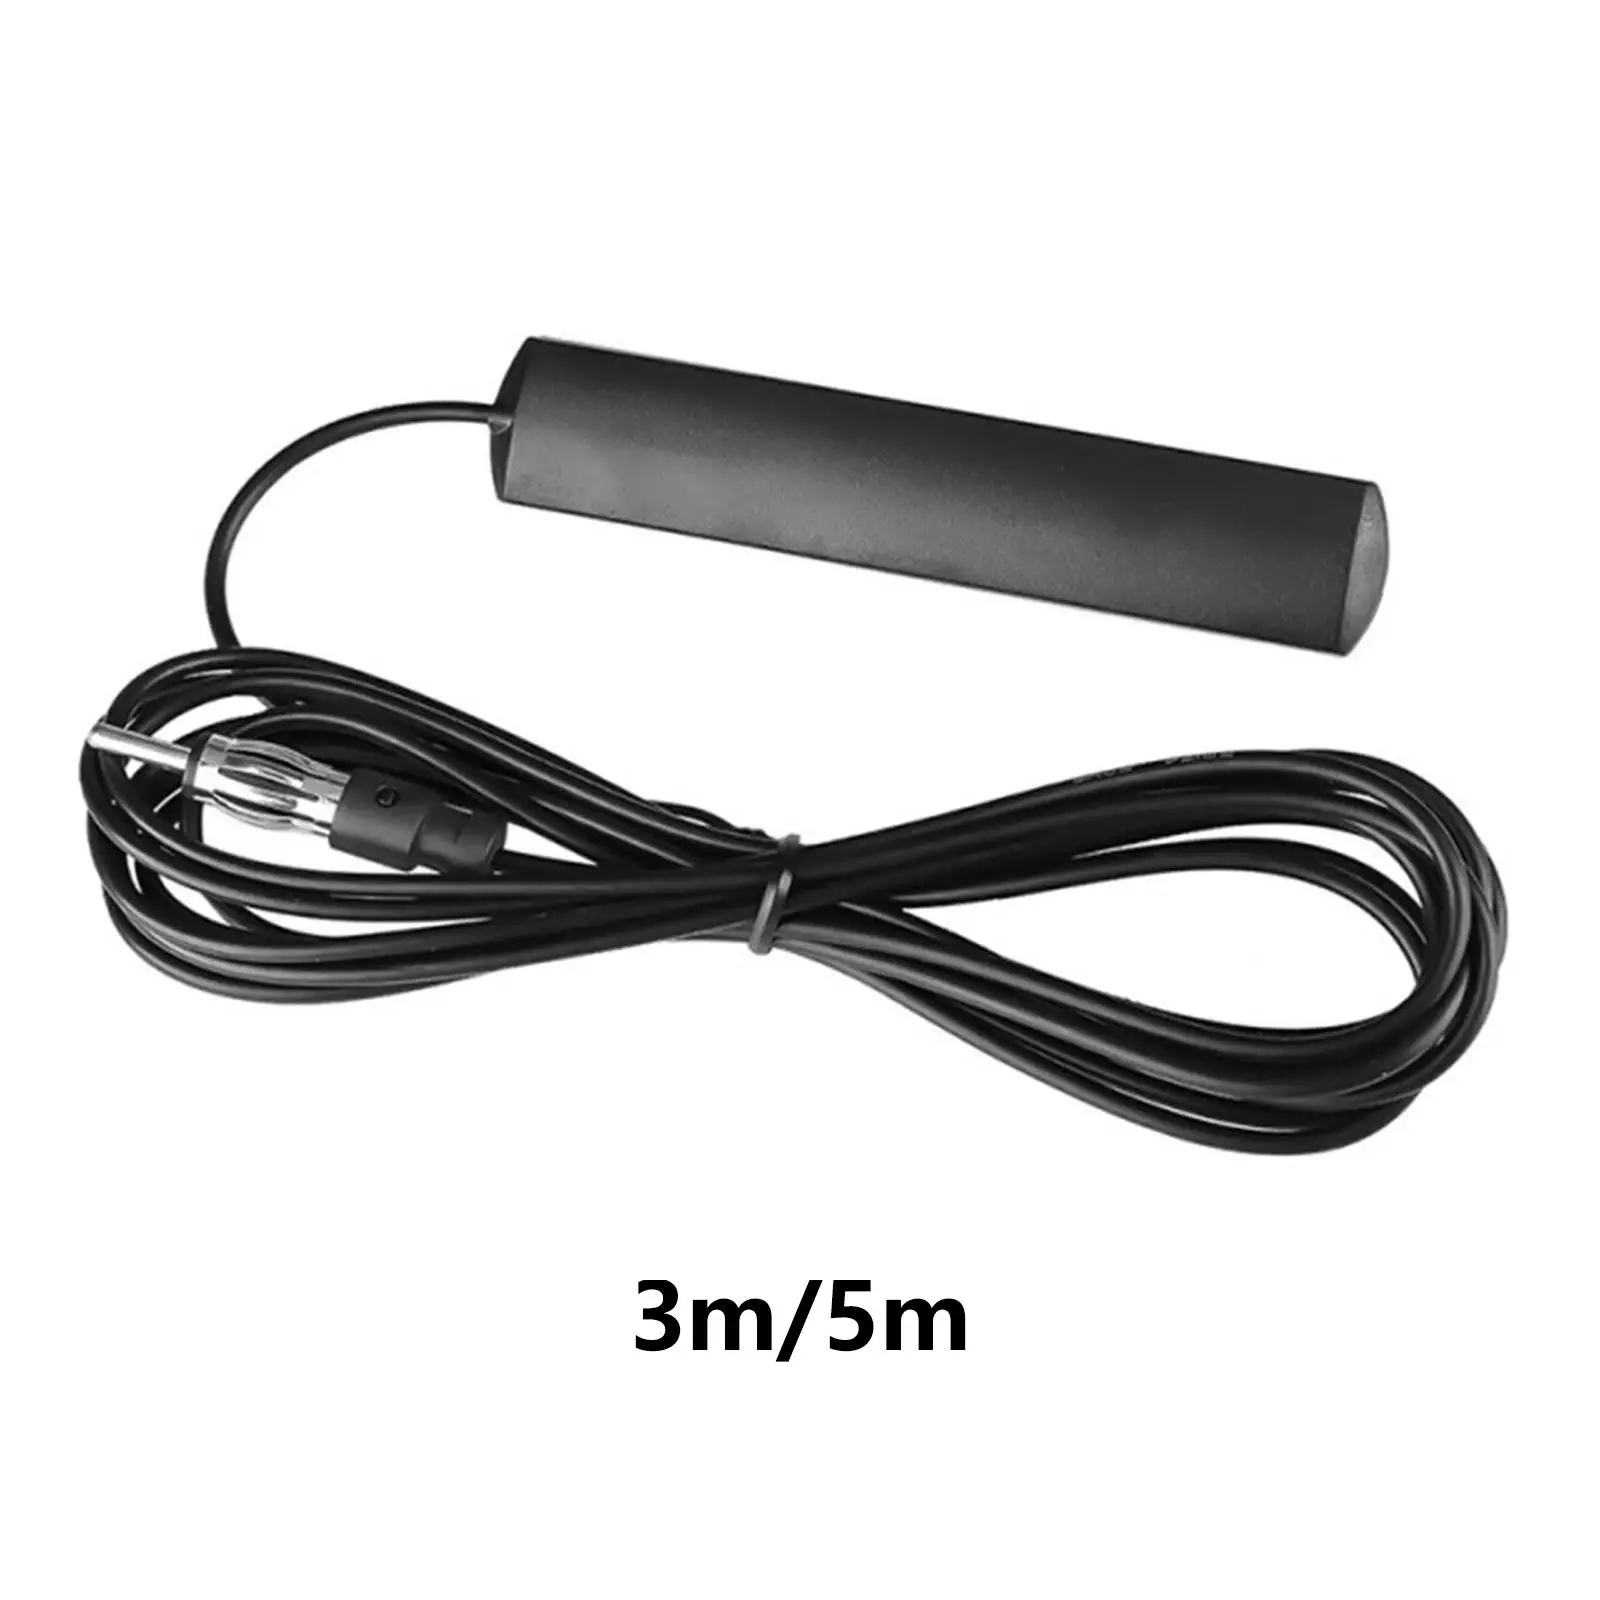 Car Antenna AM FM Radio Antenna Signal Amp Amplifier for Vehicle Motorcycle Campers